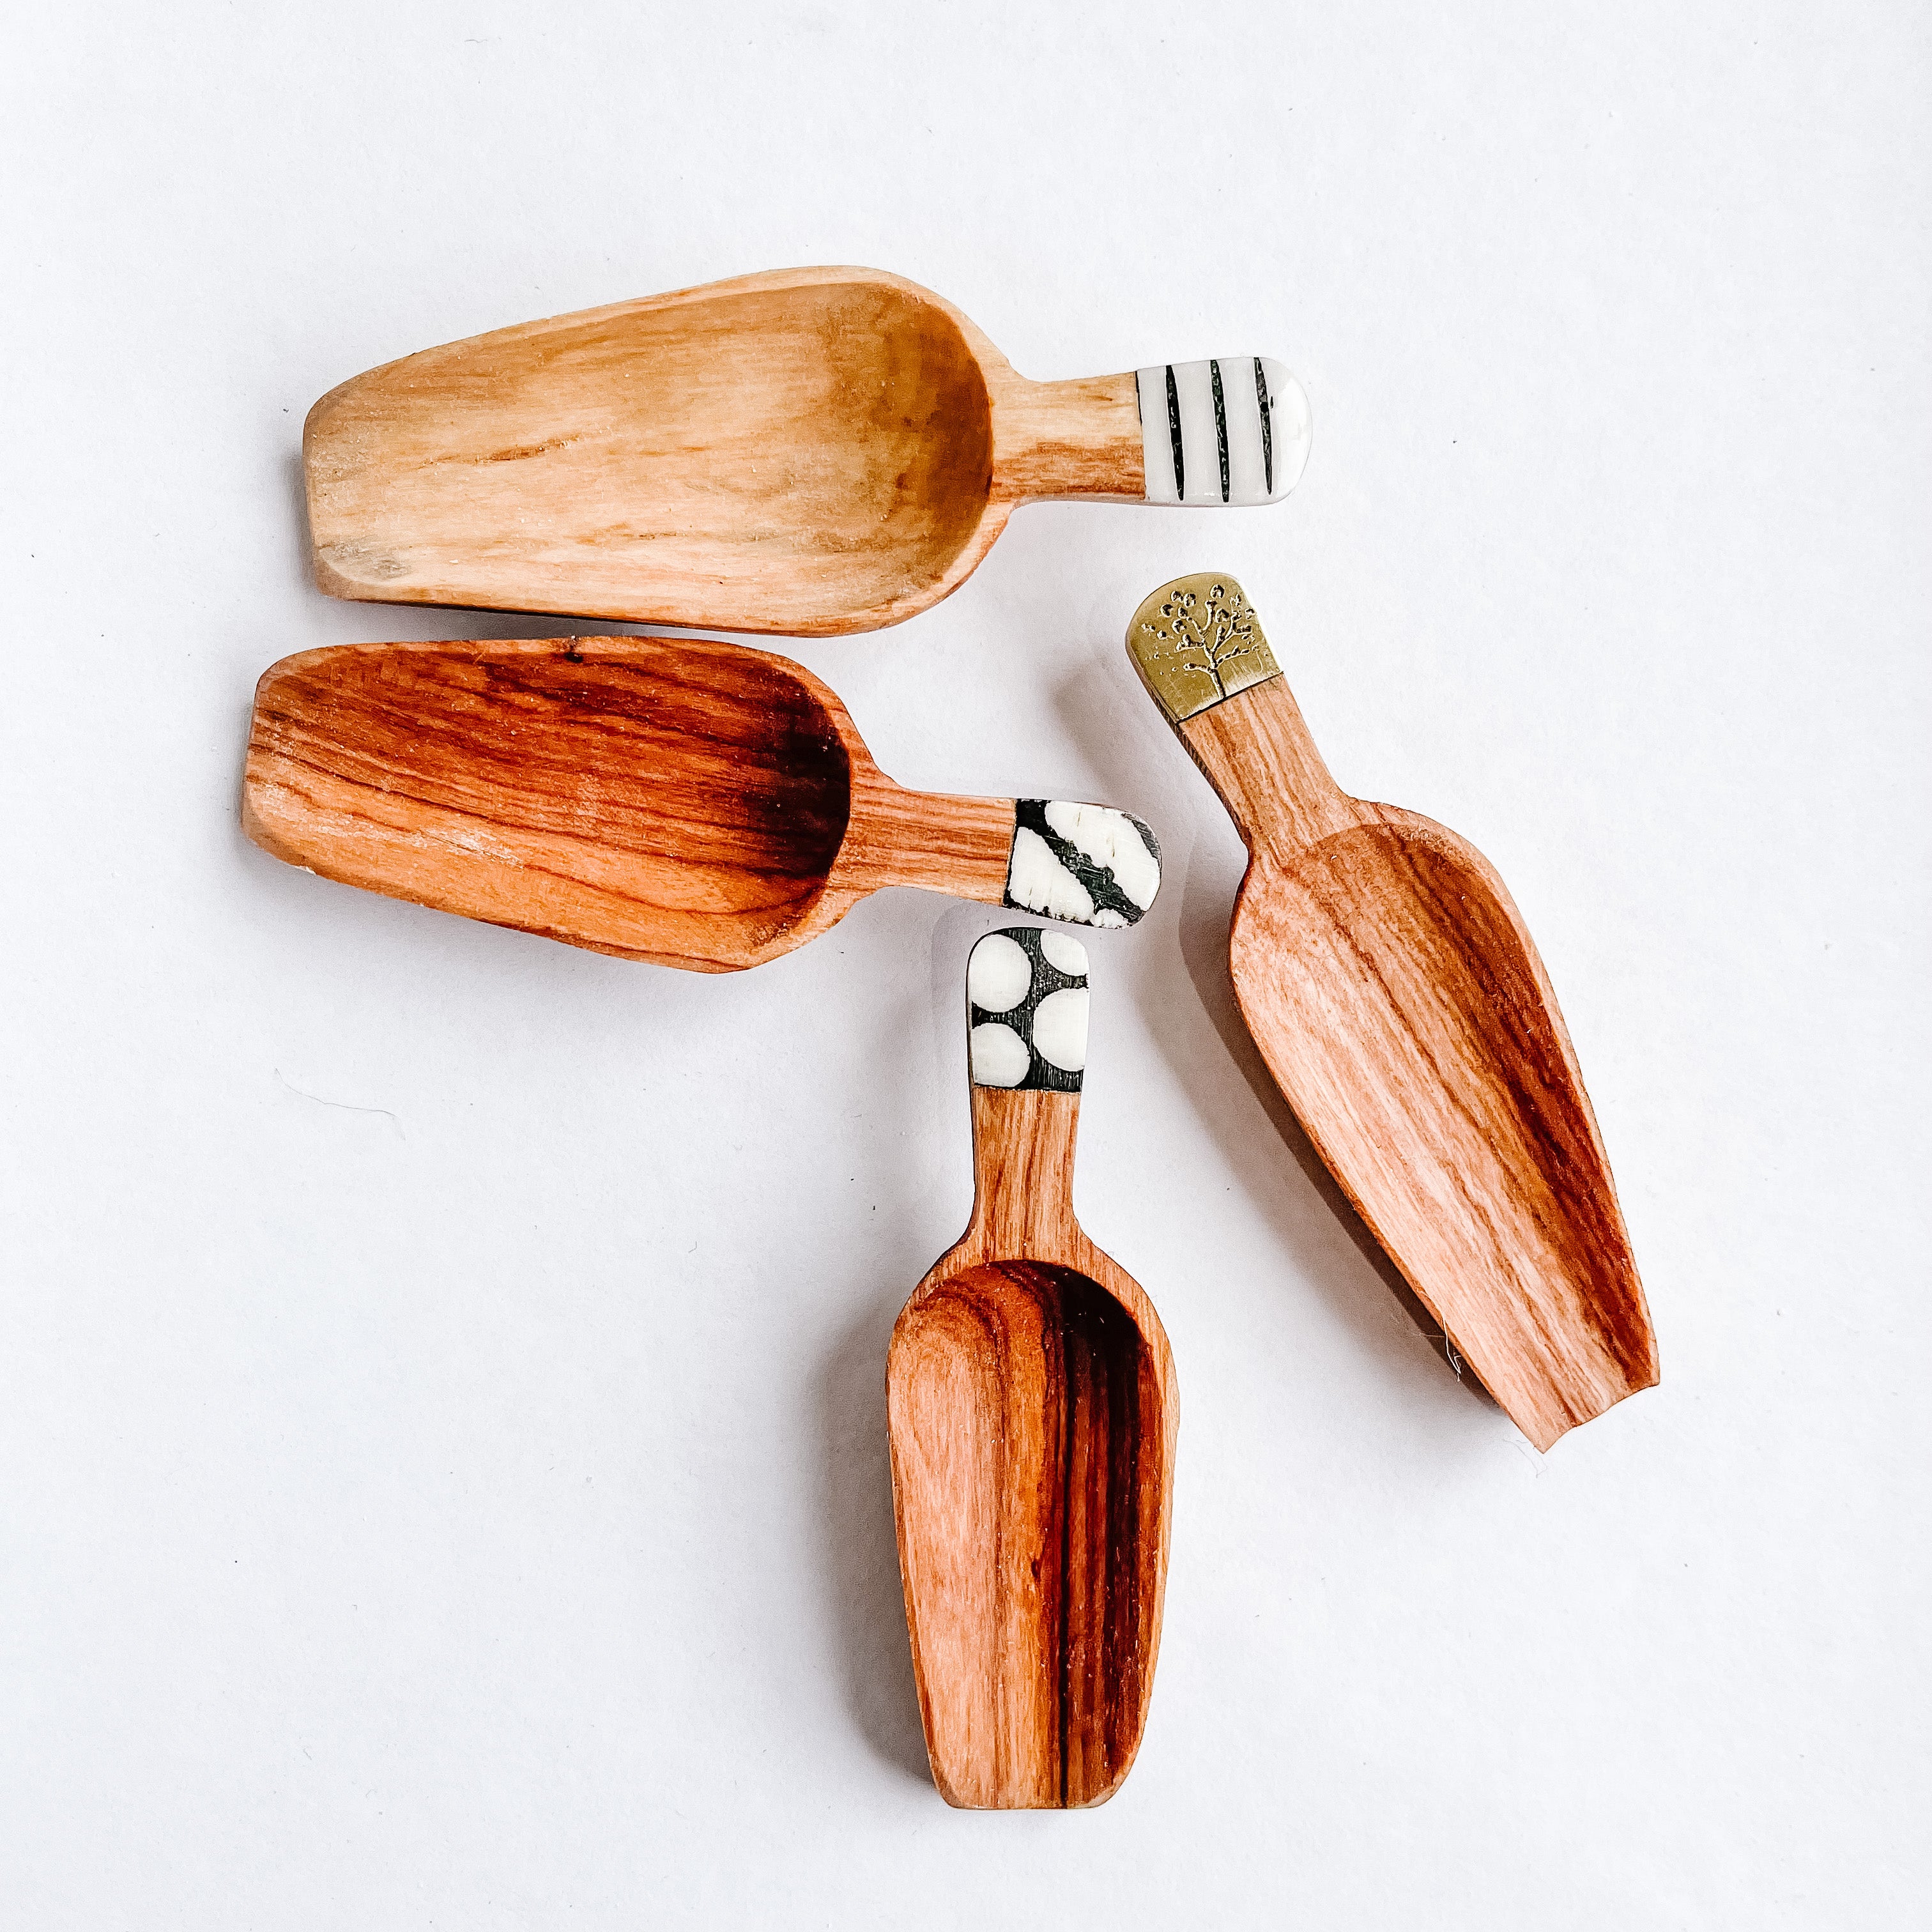 JustOne's four inch wooden scoops with various designed handles, handcrafted in Kenya